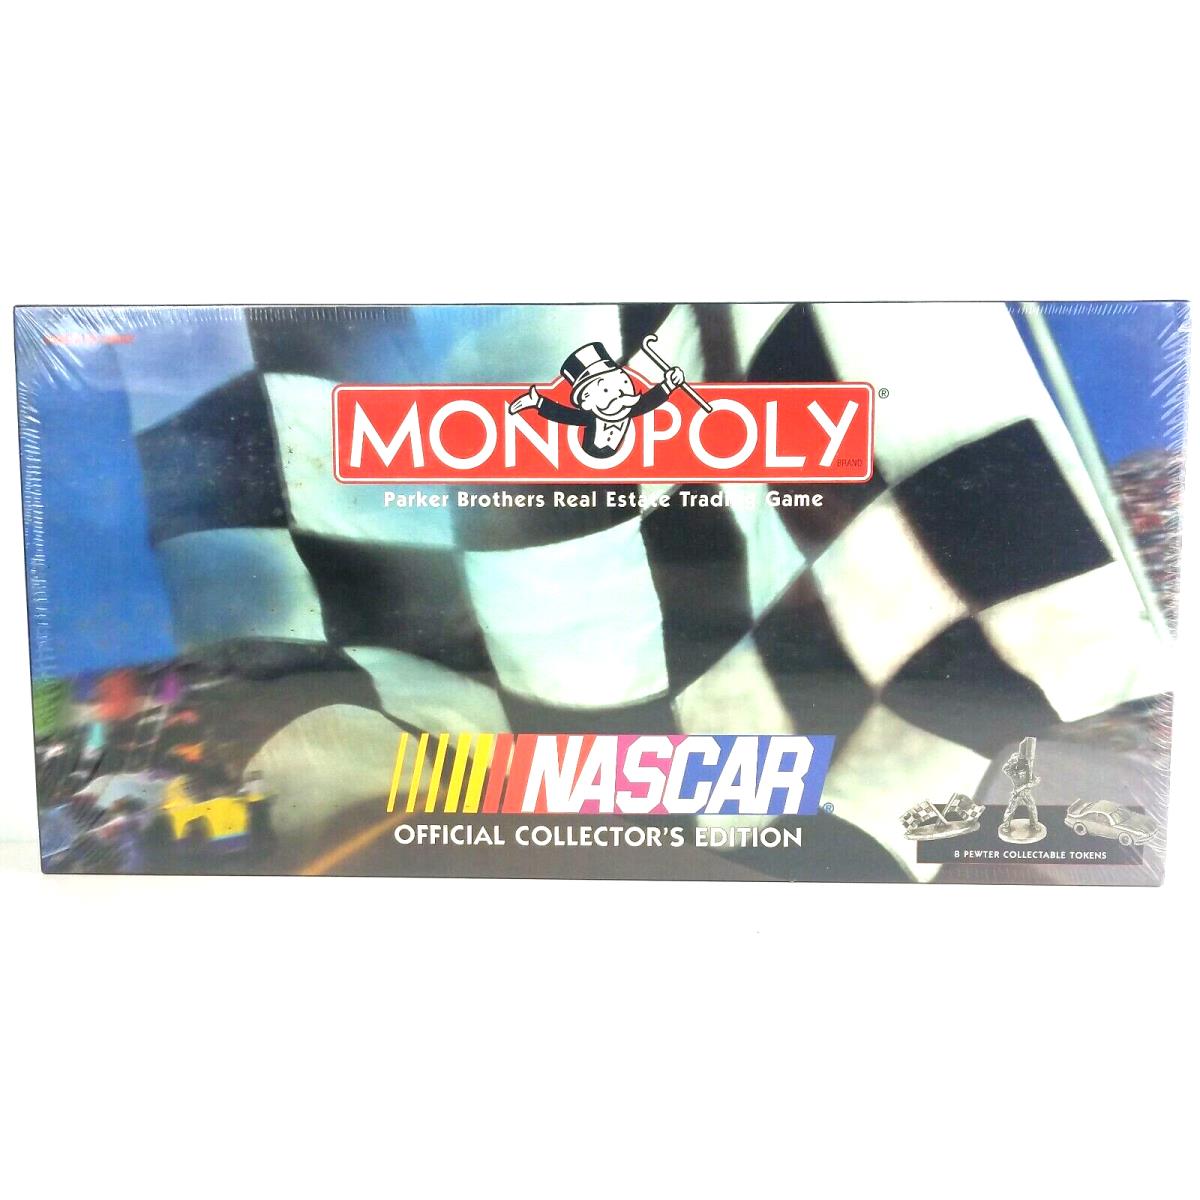 Nascar Monopoly Game 1997 Vintage Official Collectors Edition Bnisw